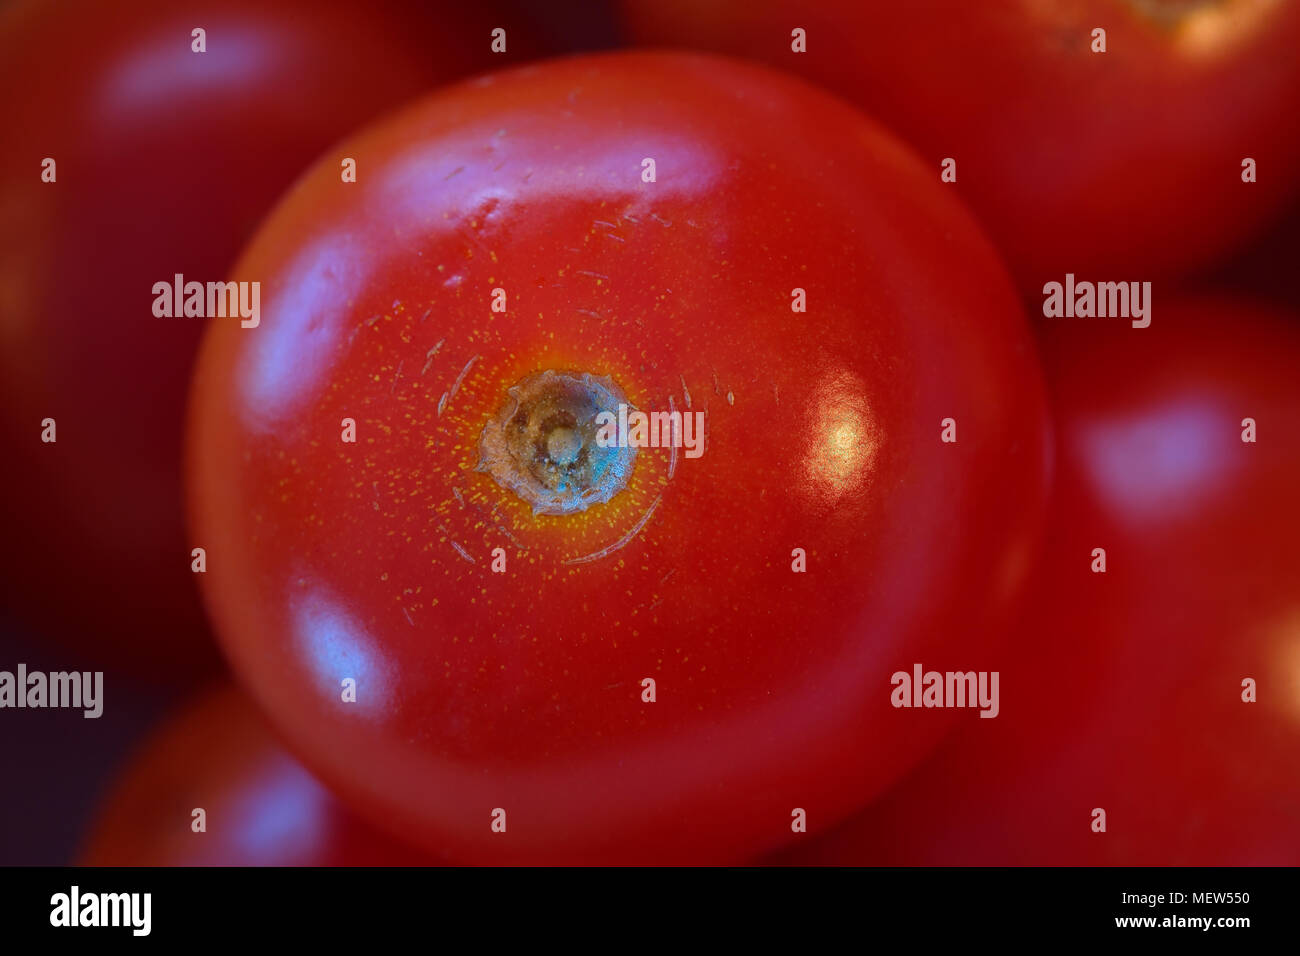 Close up of a red Tomato Stock Photo